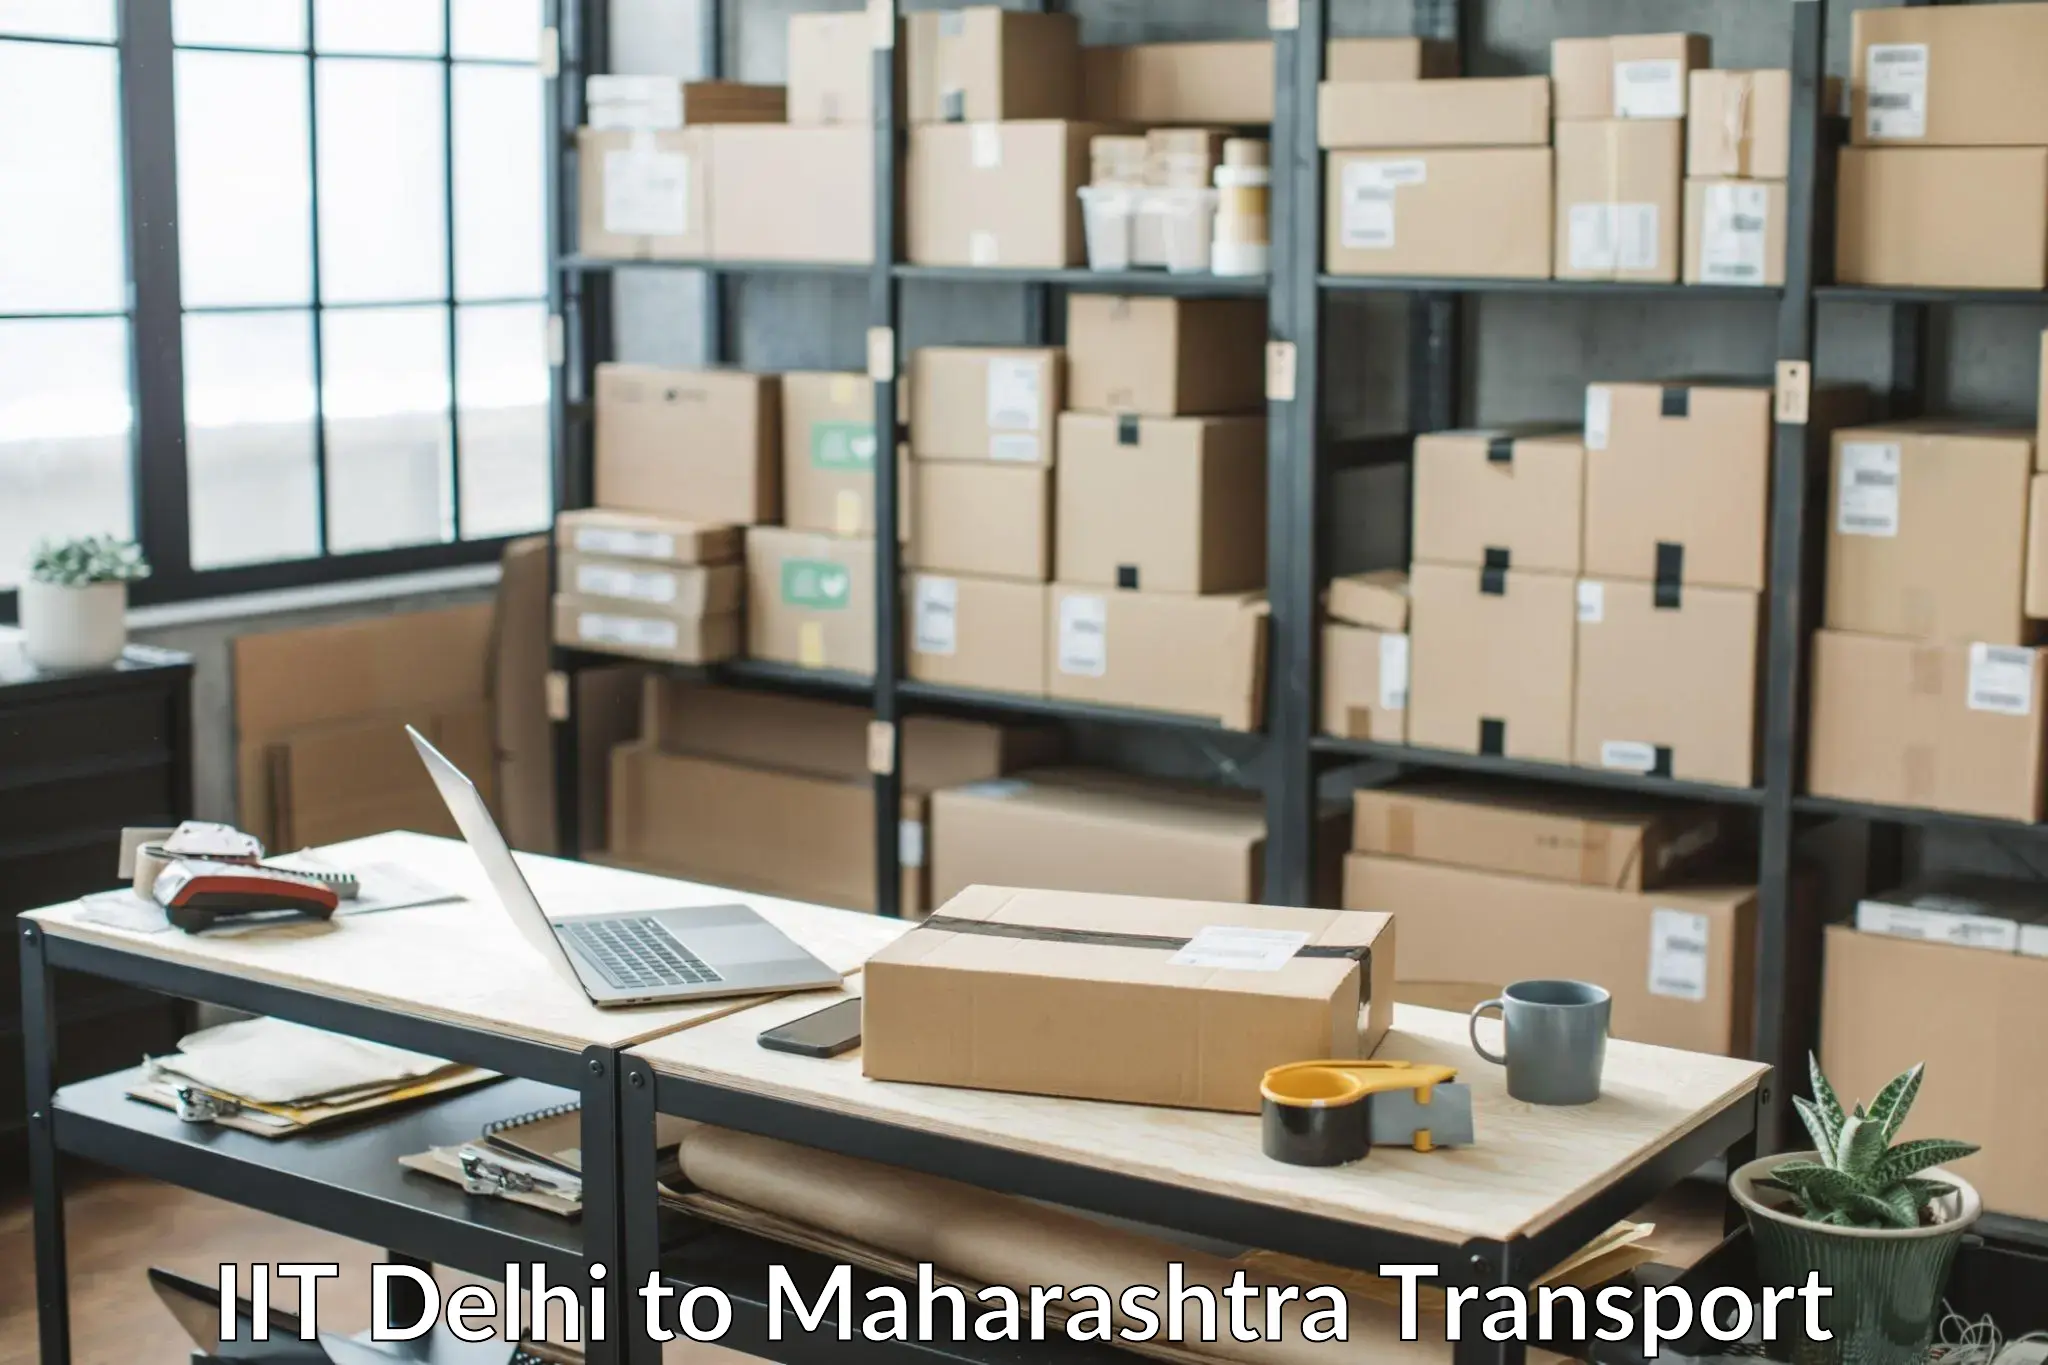 Goods delivery service IIT Delhi to Loha Nanded